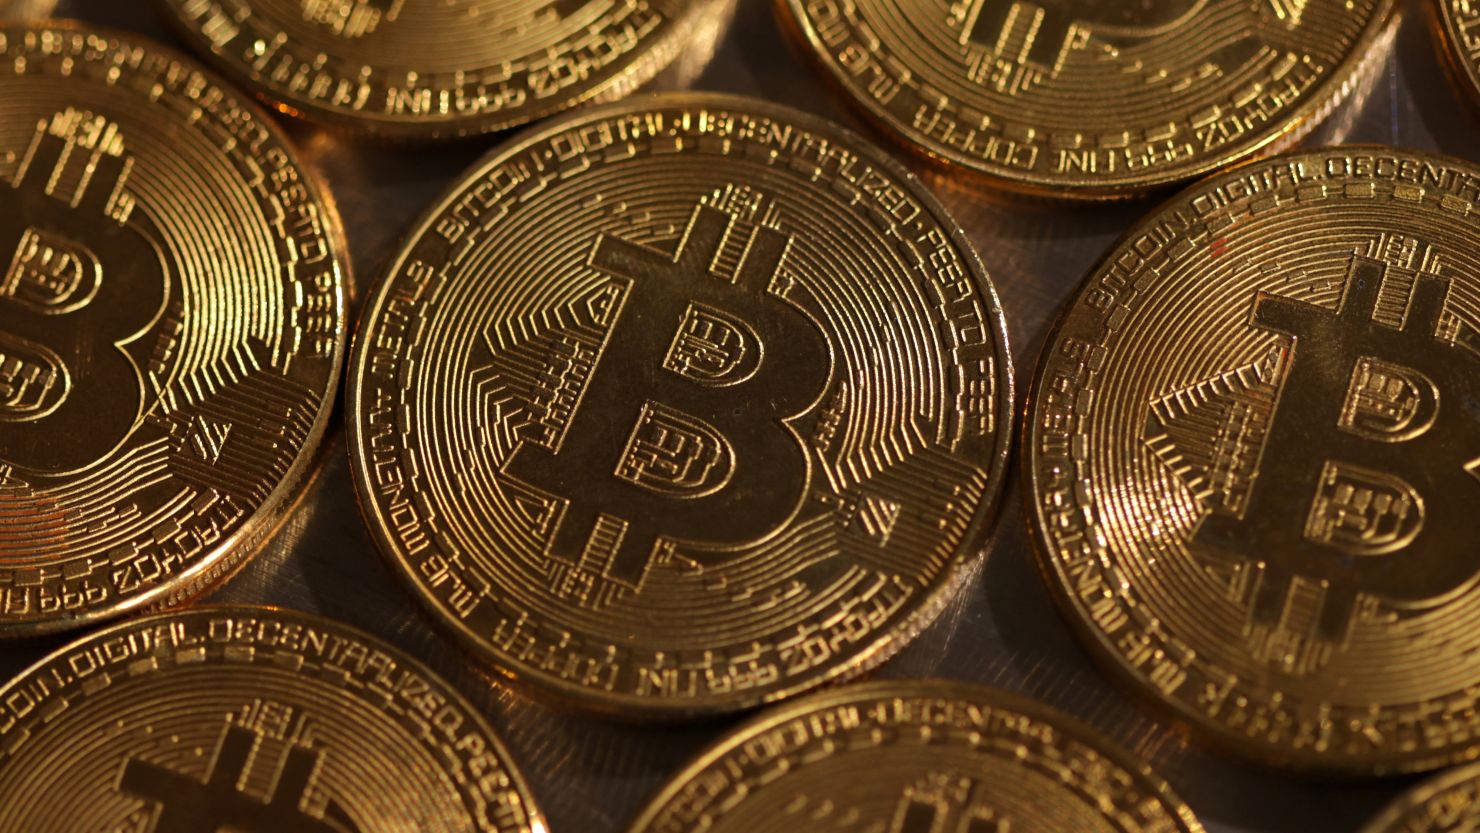 Bitcoin hit a record high in March, fueled partly by investors geeking out over the halving.